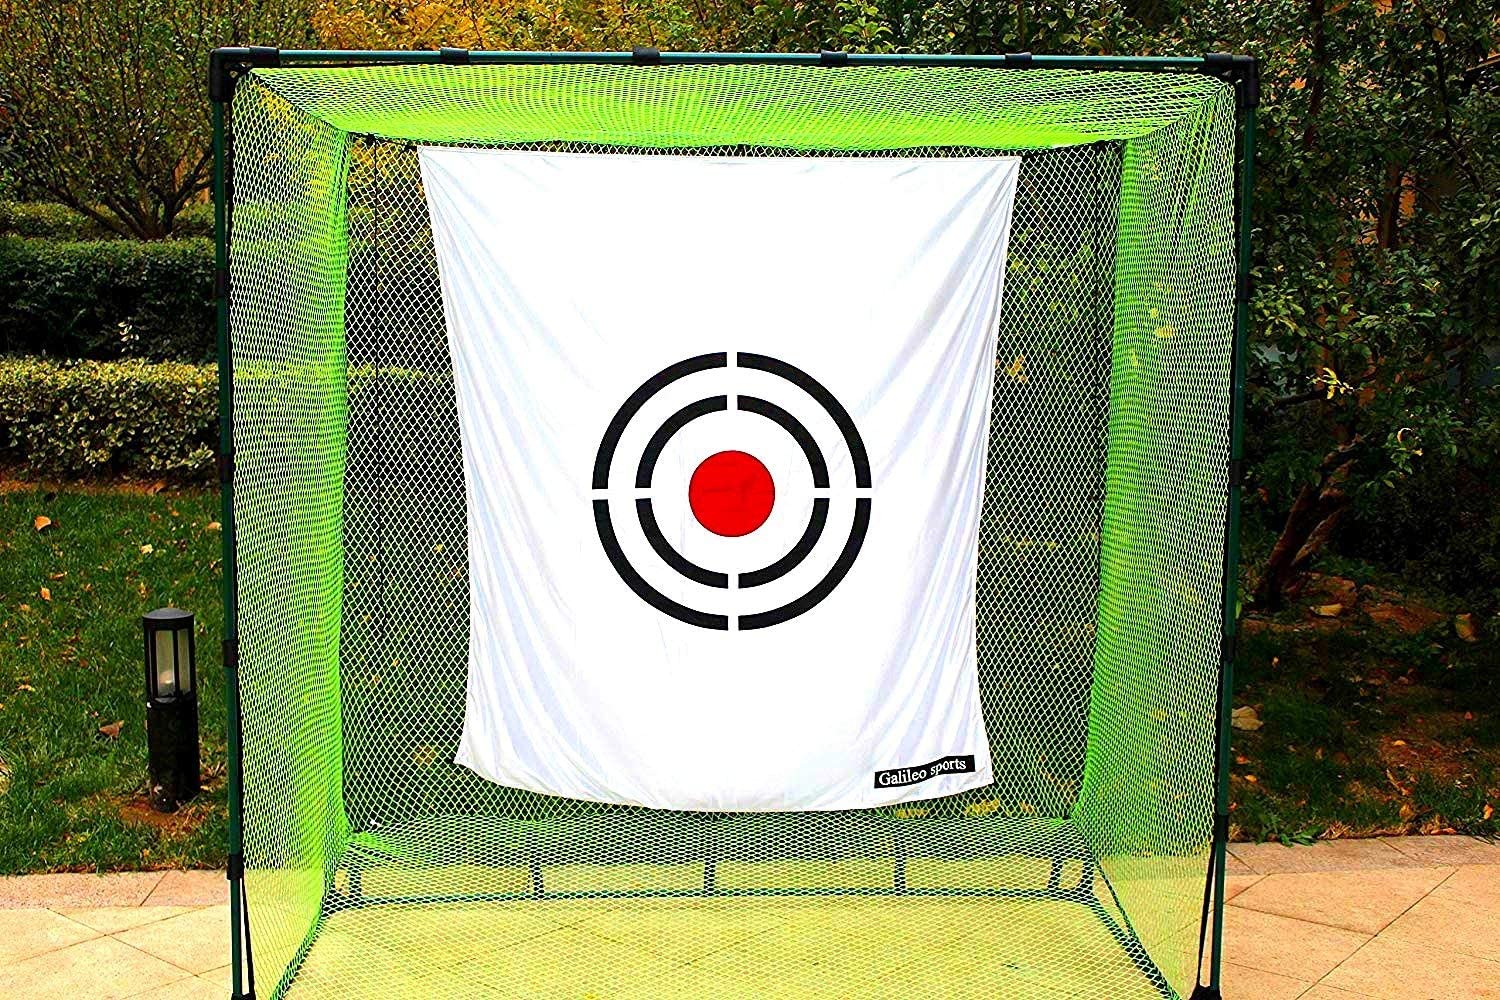 Galileo Practice Backstop Target Backyard Driving PVC Black Circle Style Target White| 5'x6' Size Replacement Target|for Golf Batting Cage